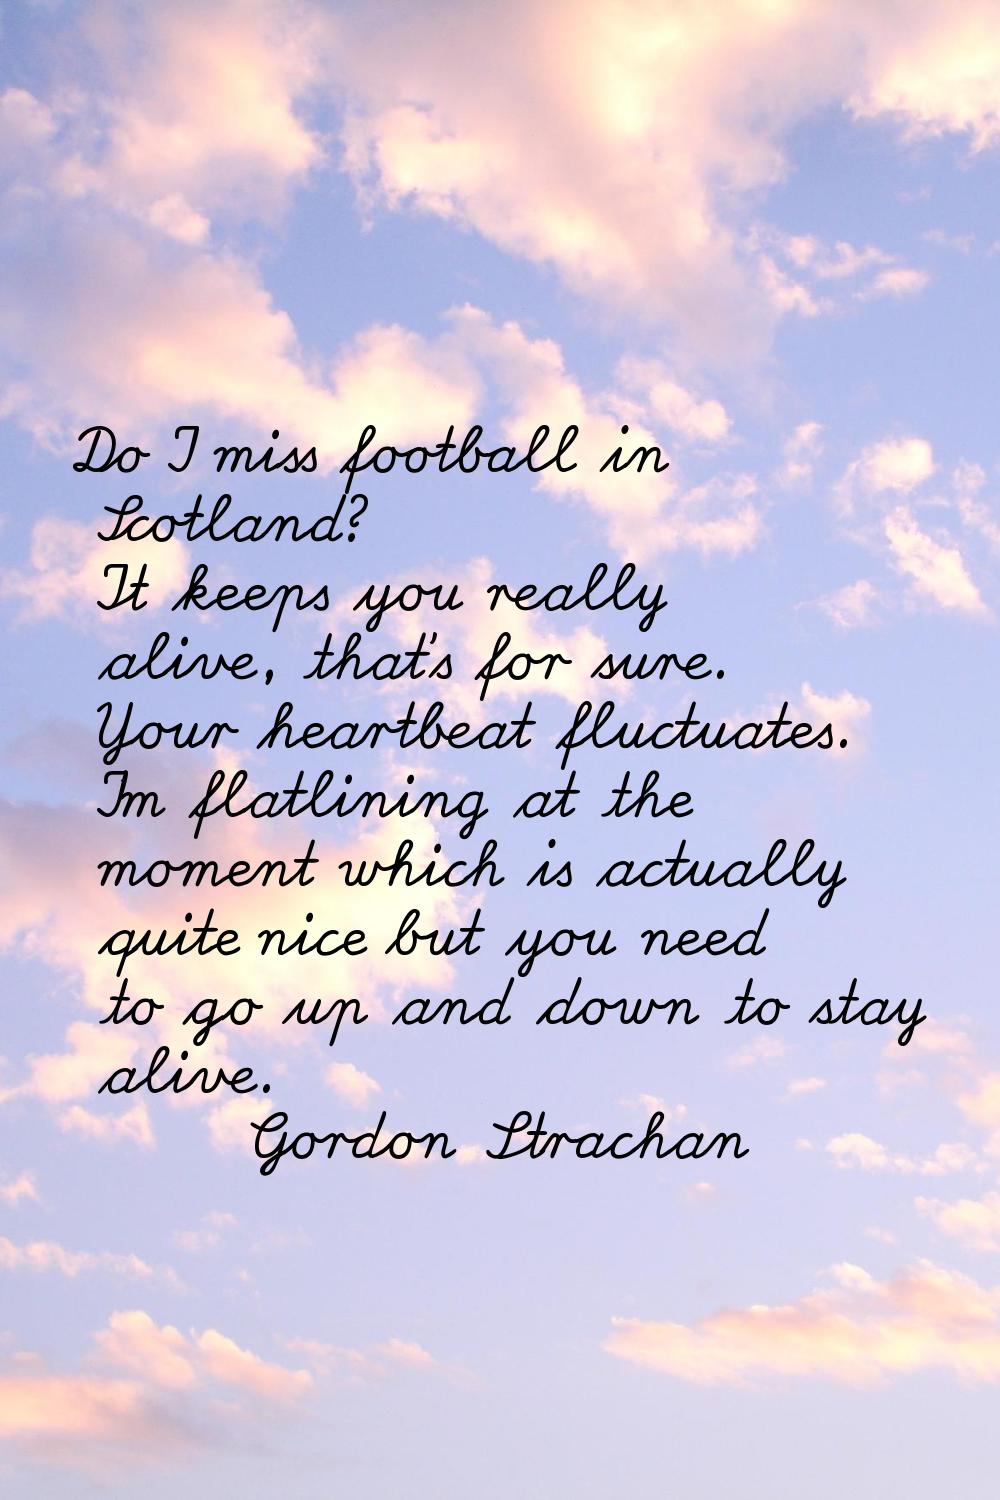 Do I miss football in Scotland? It keeps you really alive, that's for sure. Your heartbeat fluctuat